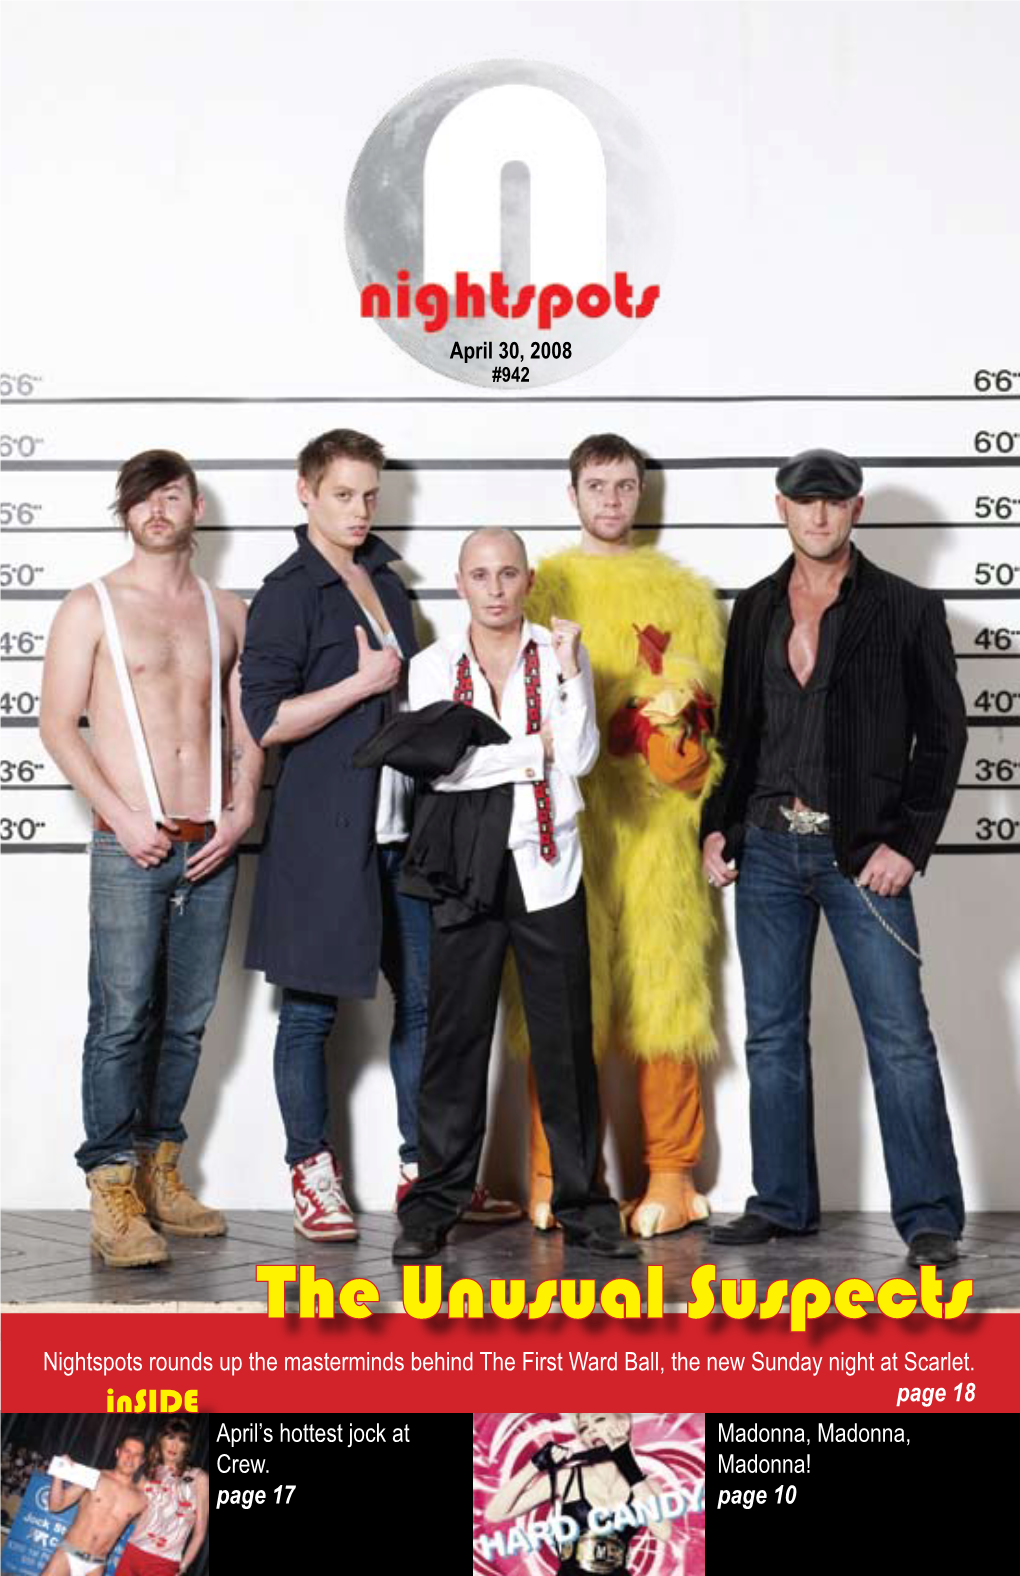 The Unusual Suspects Nightspots Rounds up the Masterminds Behind the First Ward Ball, the New Sunday Night at Scarlet